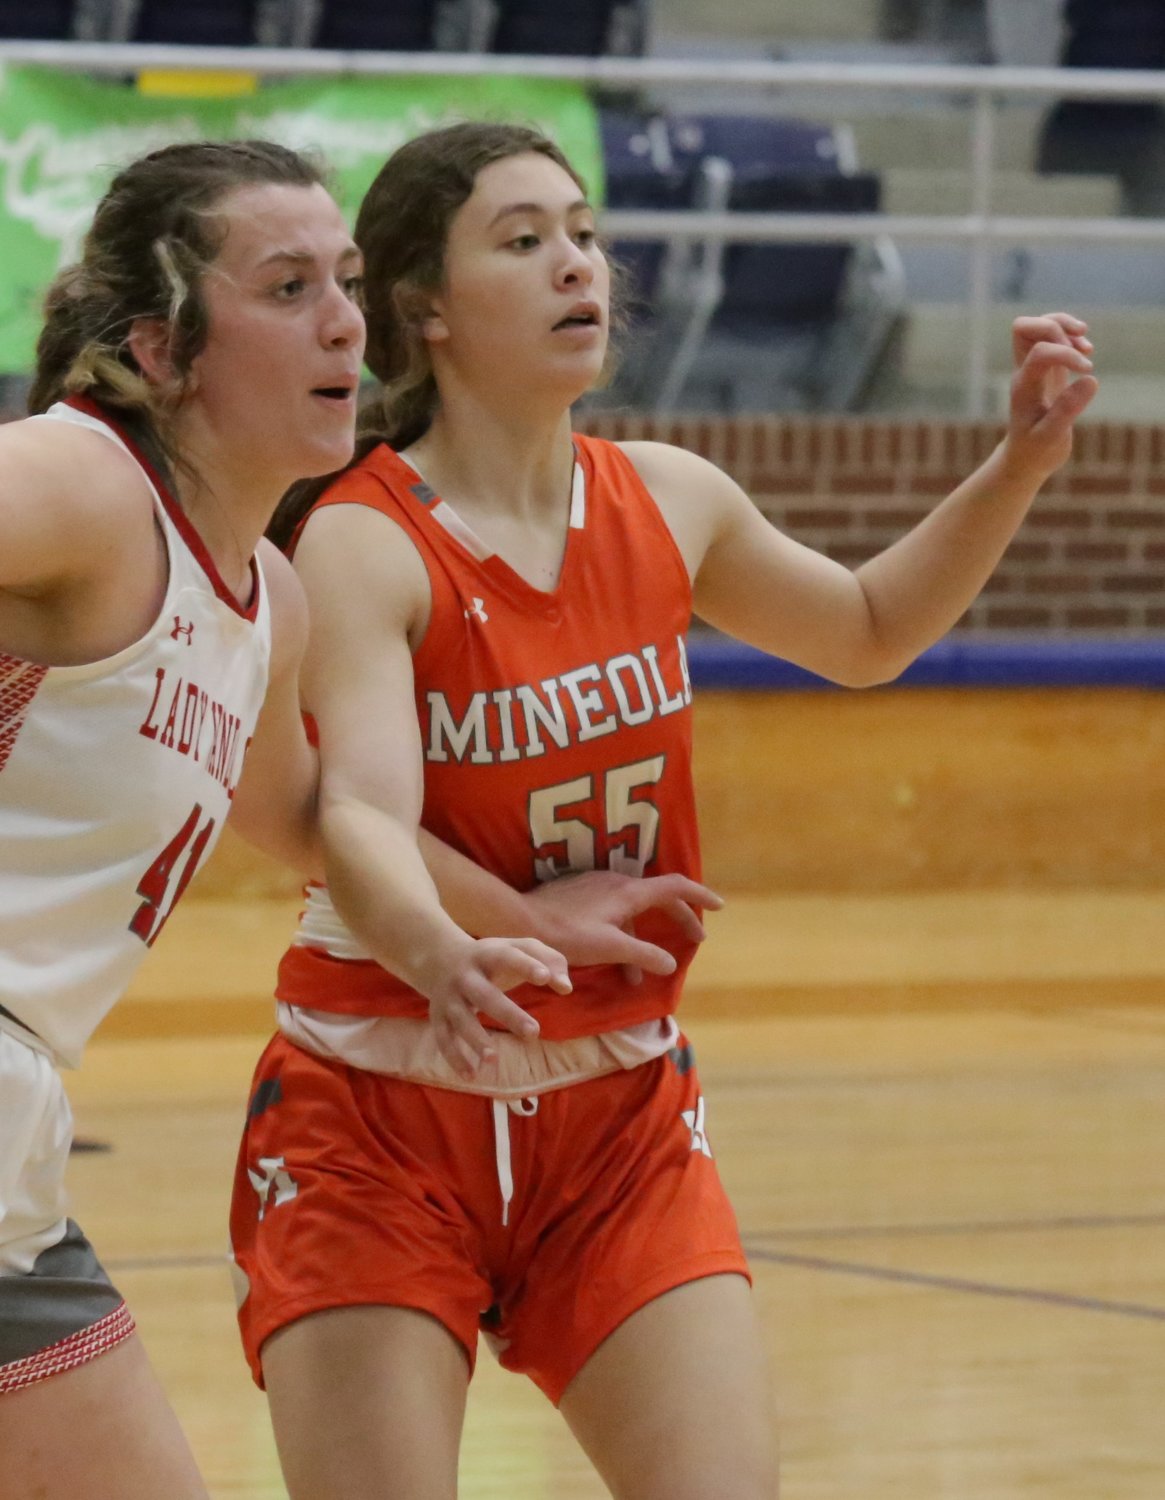 Lady Jacket Sophia Houge had a great game in her varsity role at the WIlls Point Tourney. In other tournament games, Mineola defeated Ferris 54-26, lost to Forney 39-31 and defeated Wills Point 50-28.